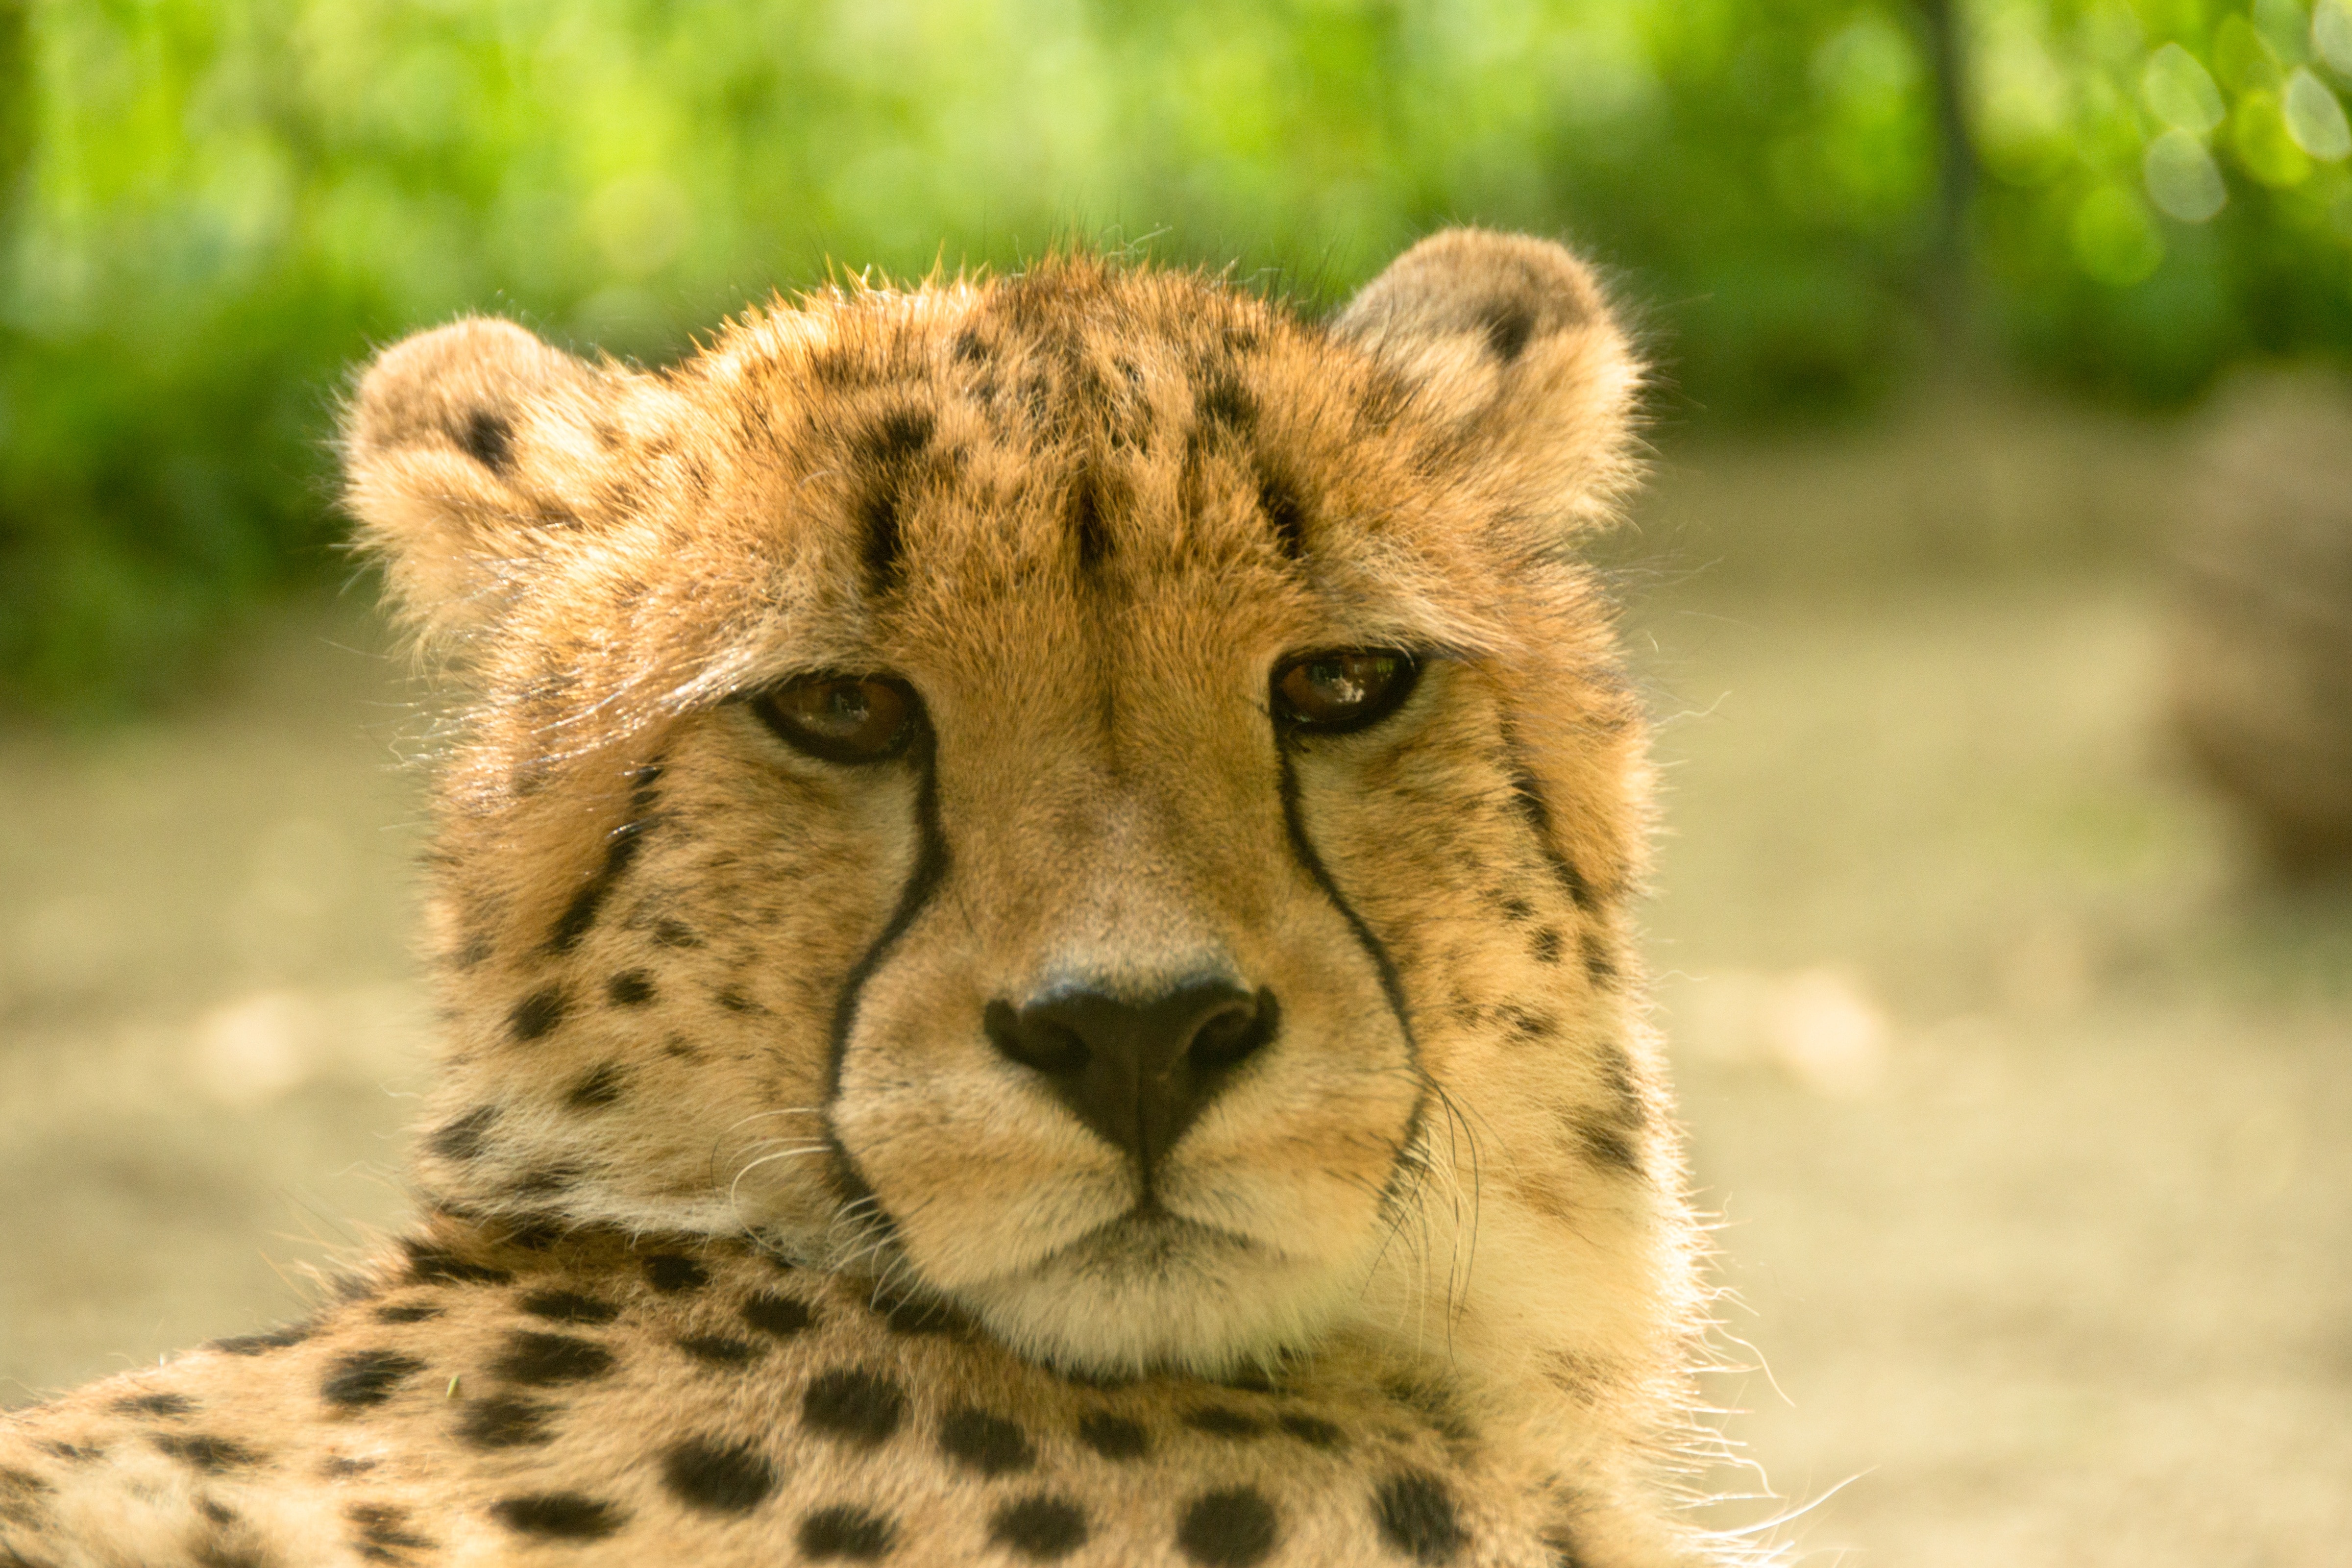 shallow focus photography of Leopard during daytime